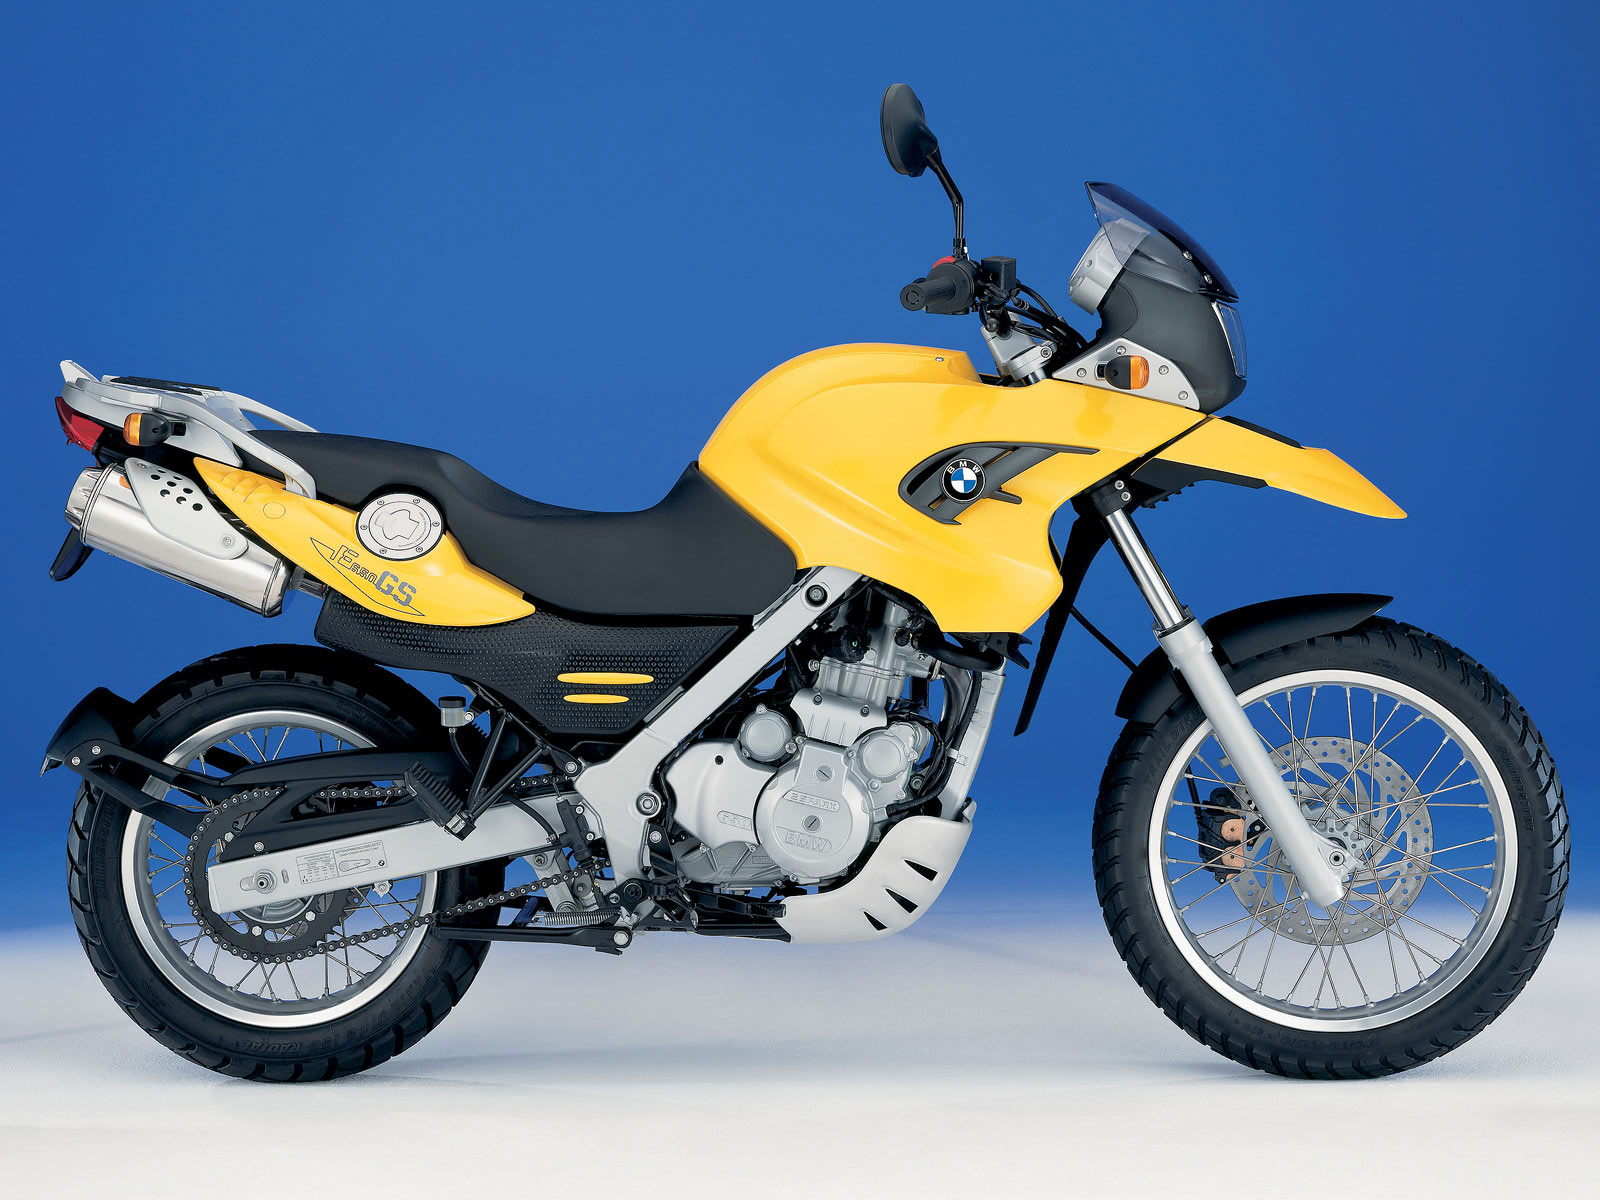 triumph scrambler off road 2004 BMW F 650 GS motorcycle wallpaper. Accident lawyers info